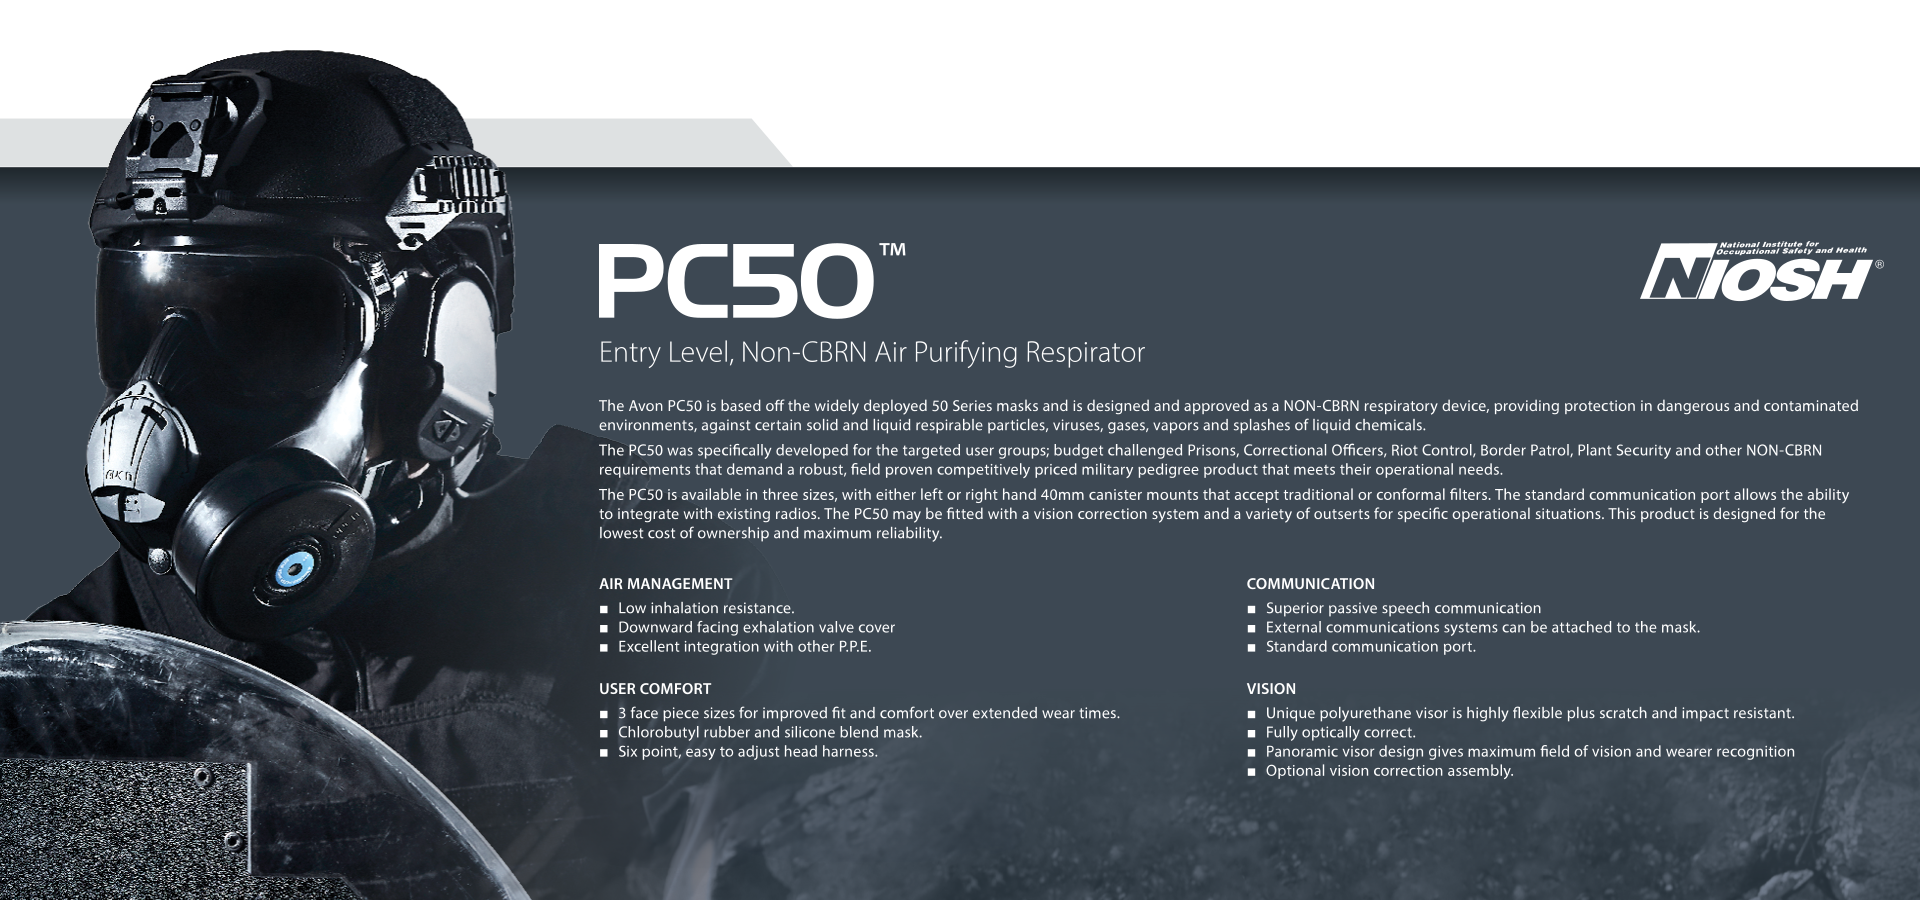 Pc50 Features